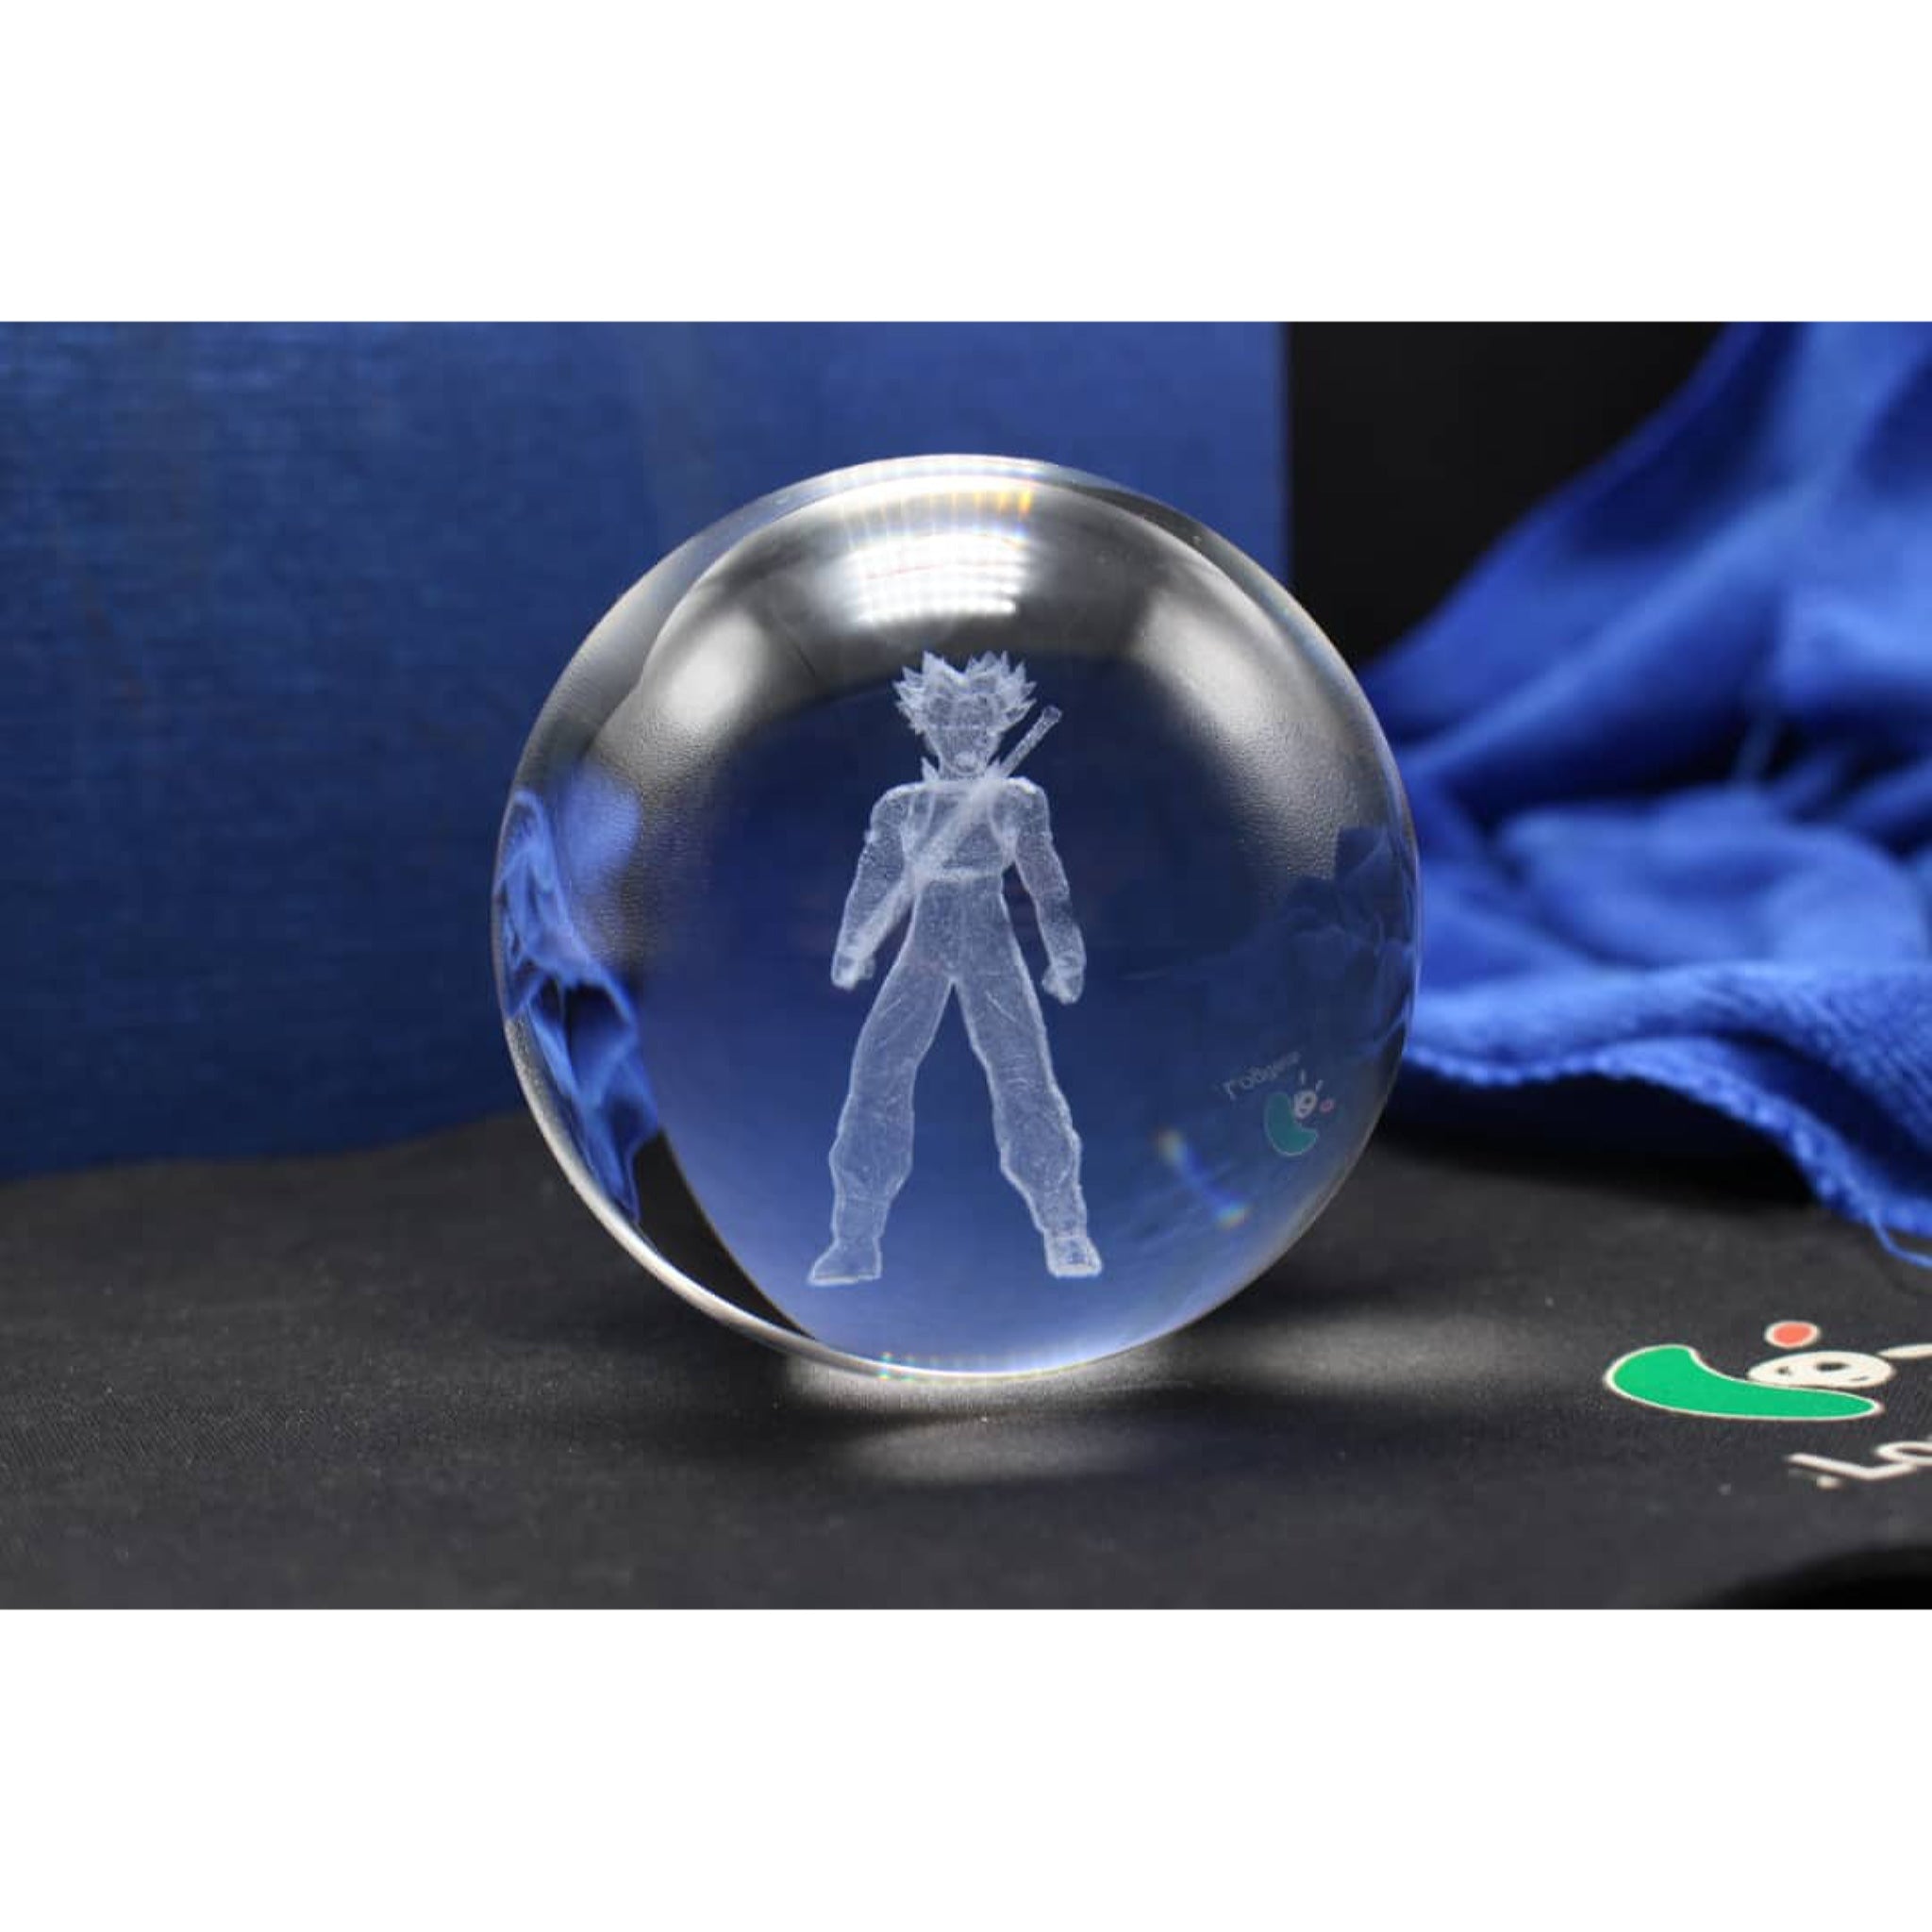 Trunks Character Glass Crystal Ball 64 with Light-Up LED Base Ornament 80mm XL Size